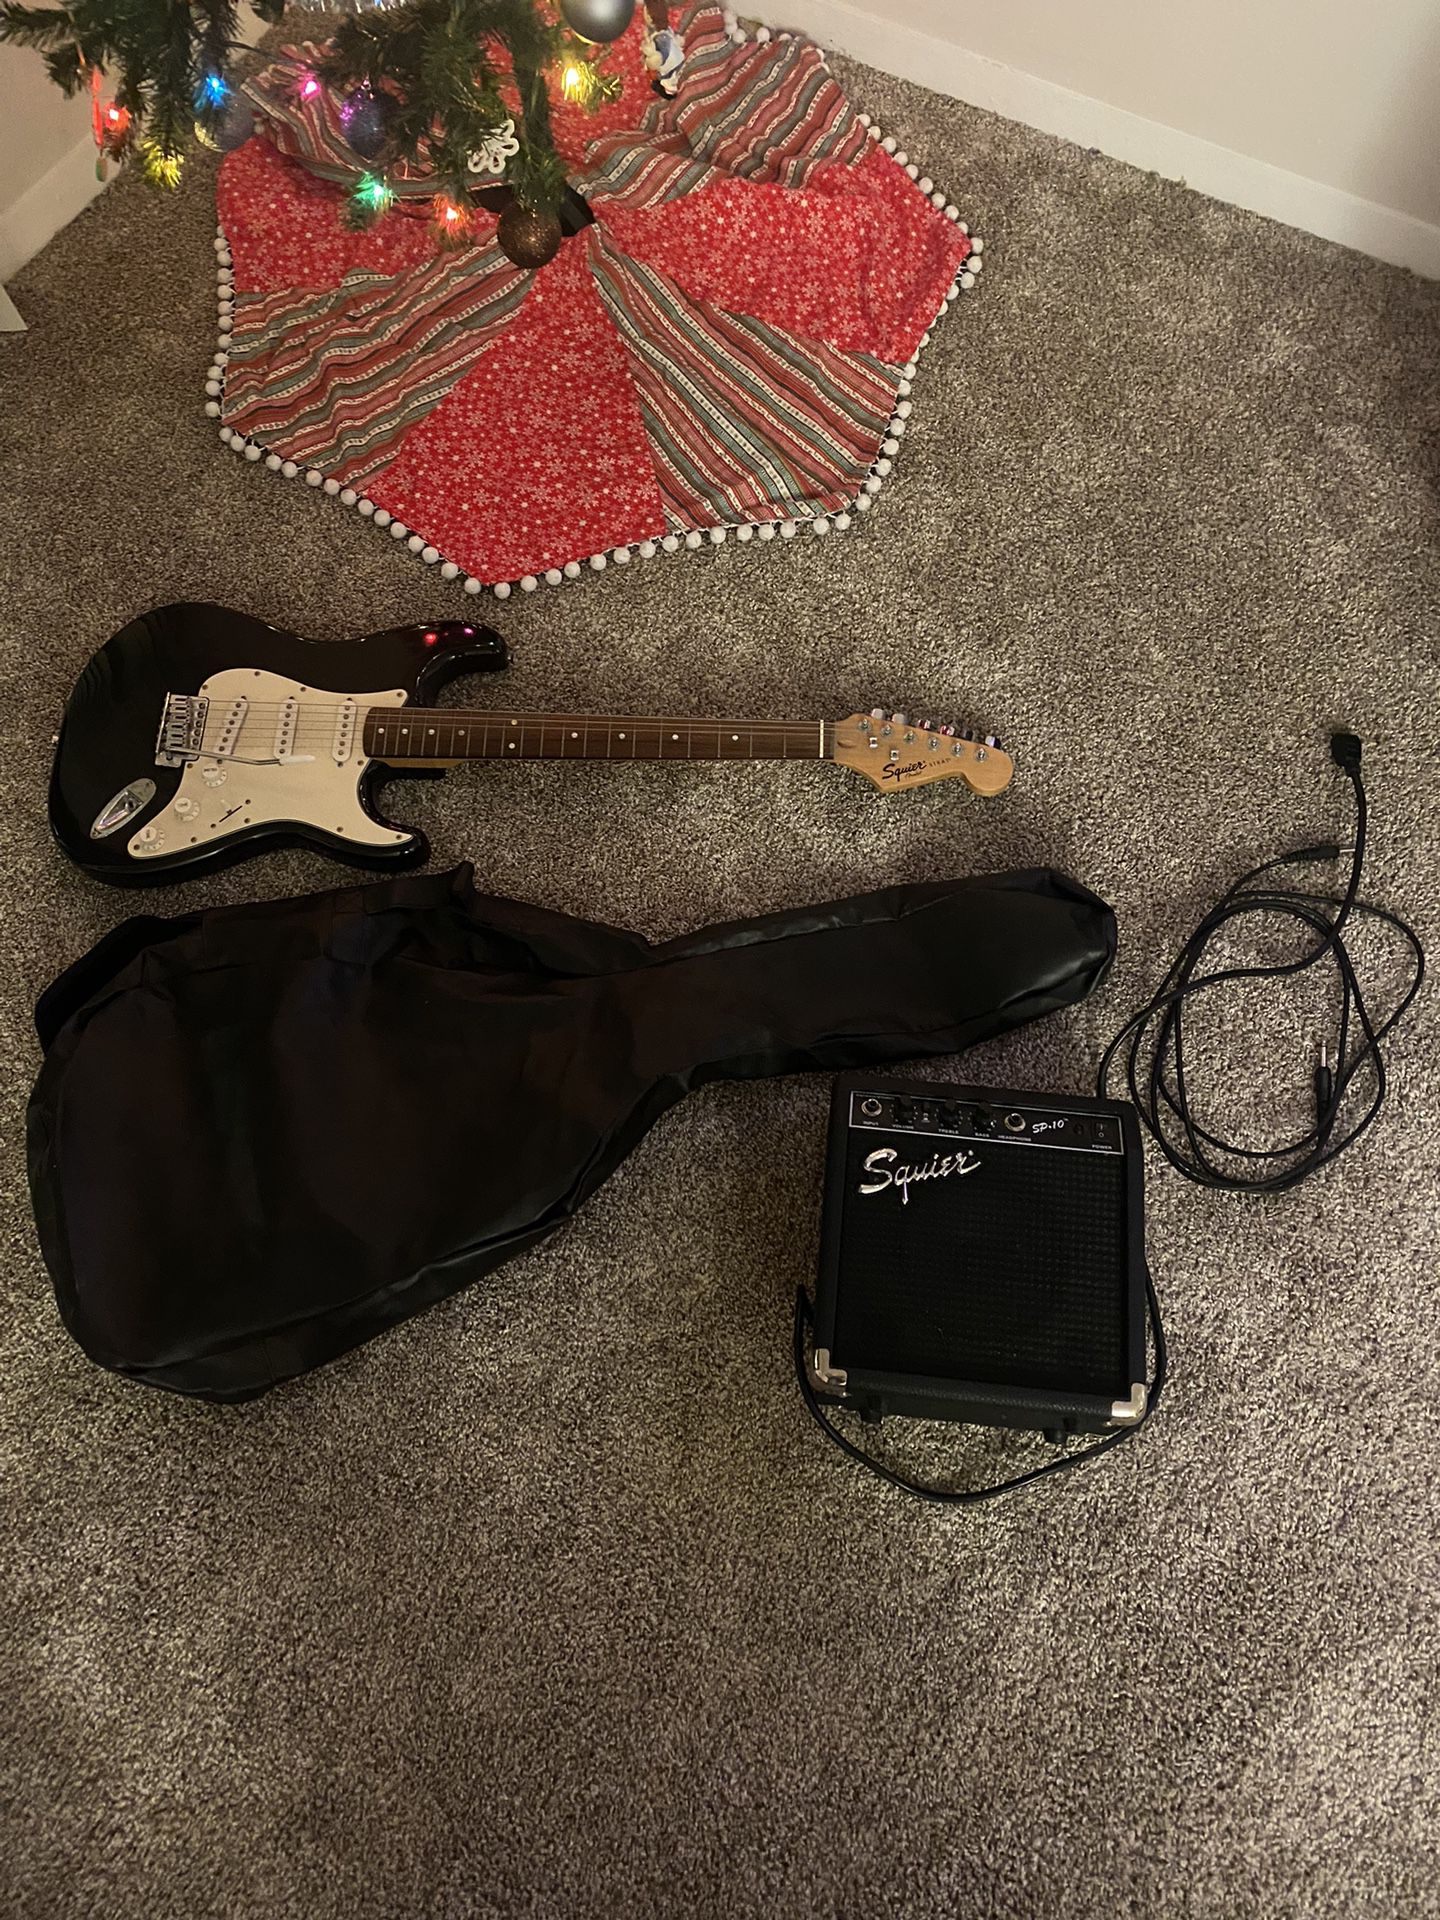 Squire Electric Guitar And Amp